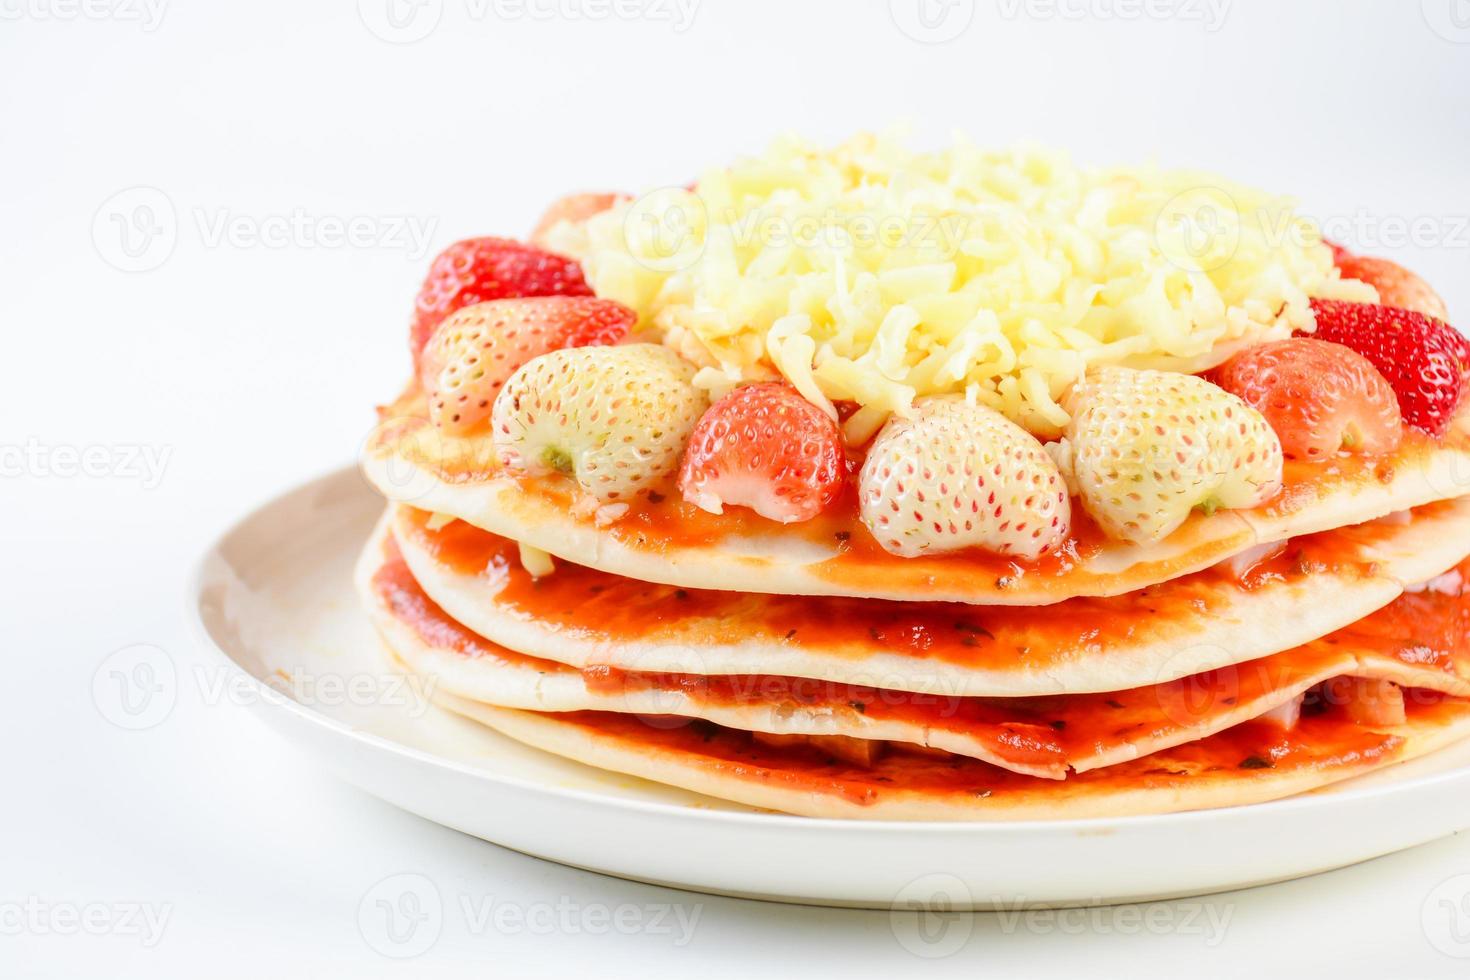 pizza with strawberry and cheeses, sweet pizza, layer cake pizza pn white background photo